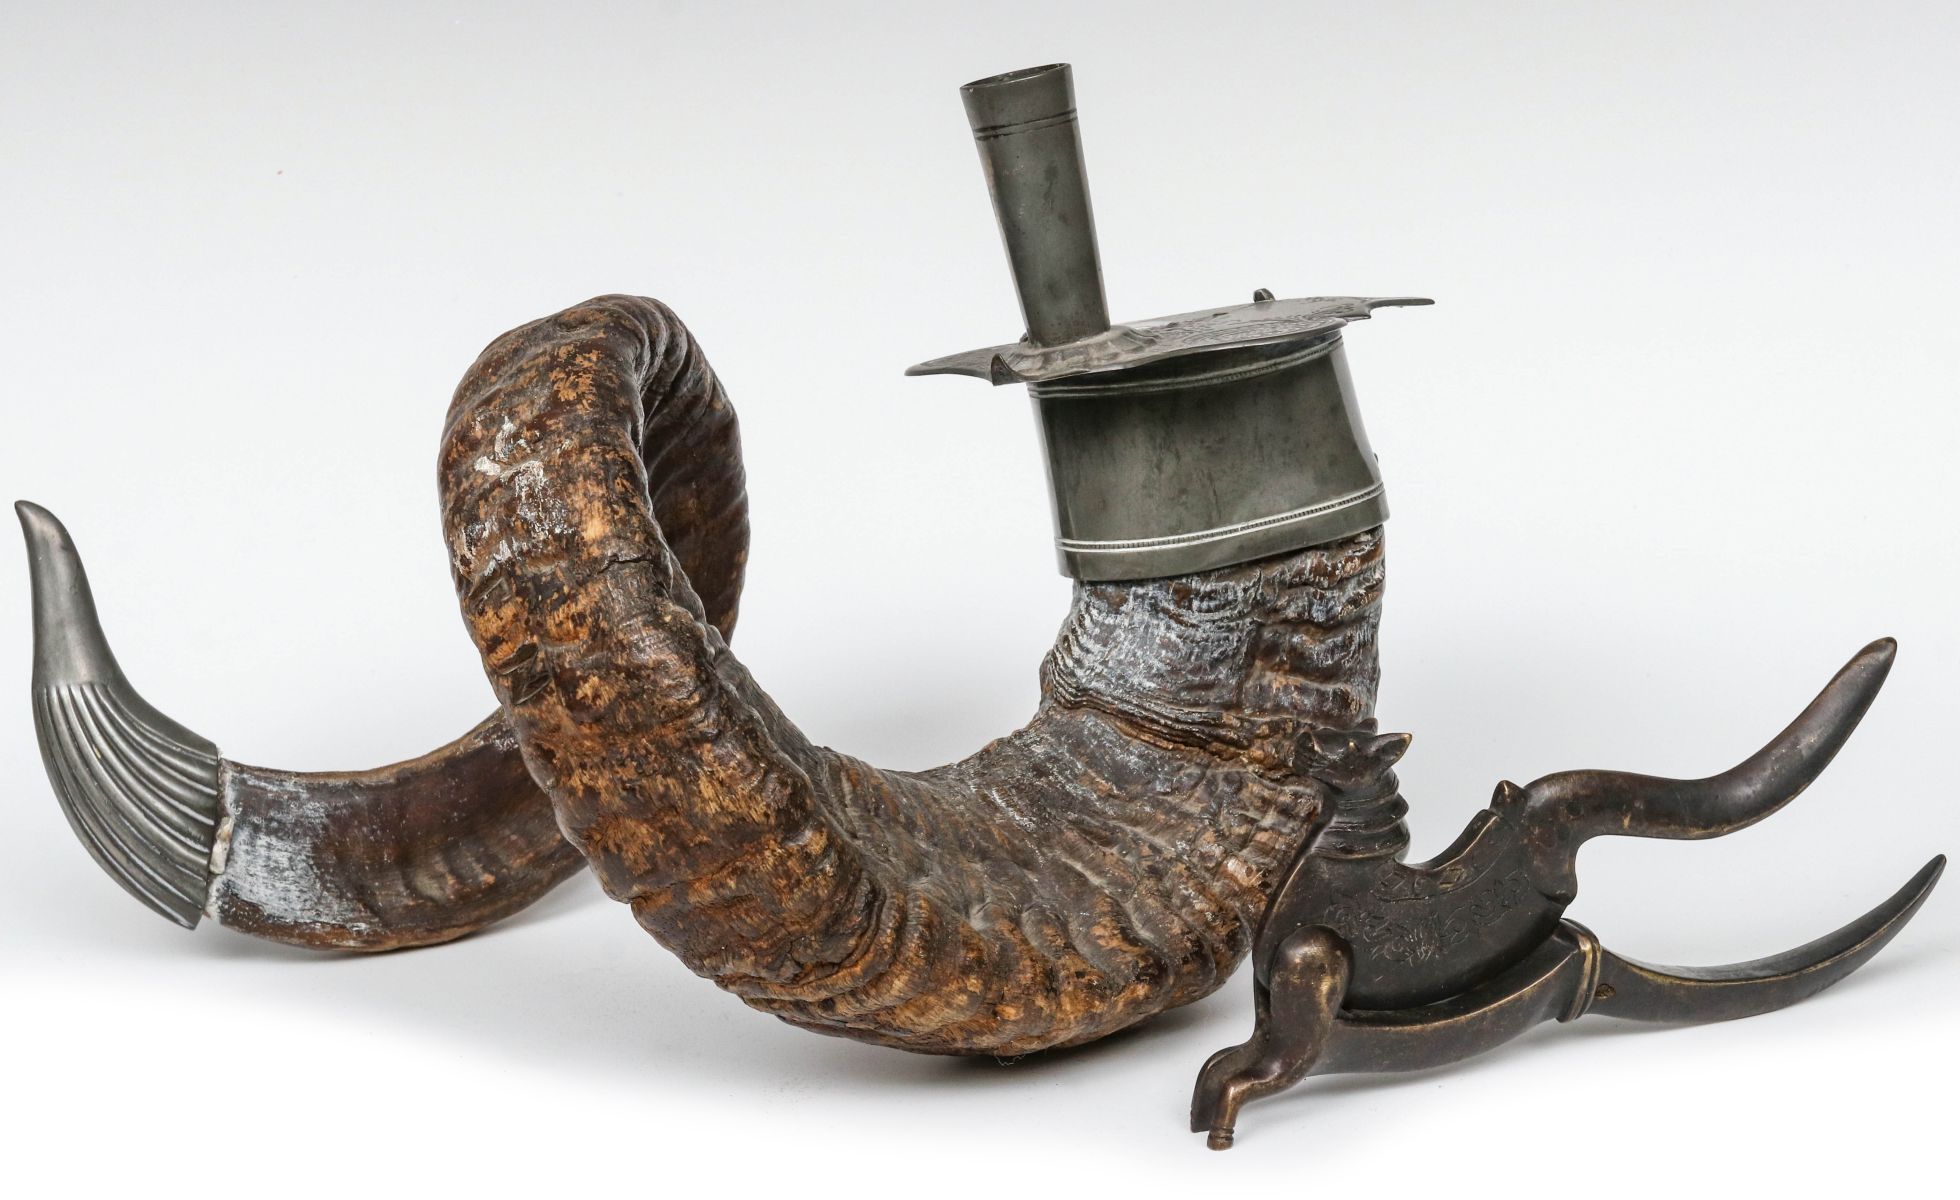 A SCOTTISH SNUFF MULL OFFERED WITH A BETEL NUT CUTTER